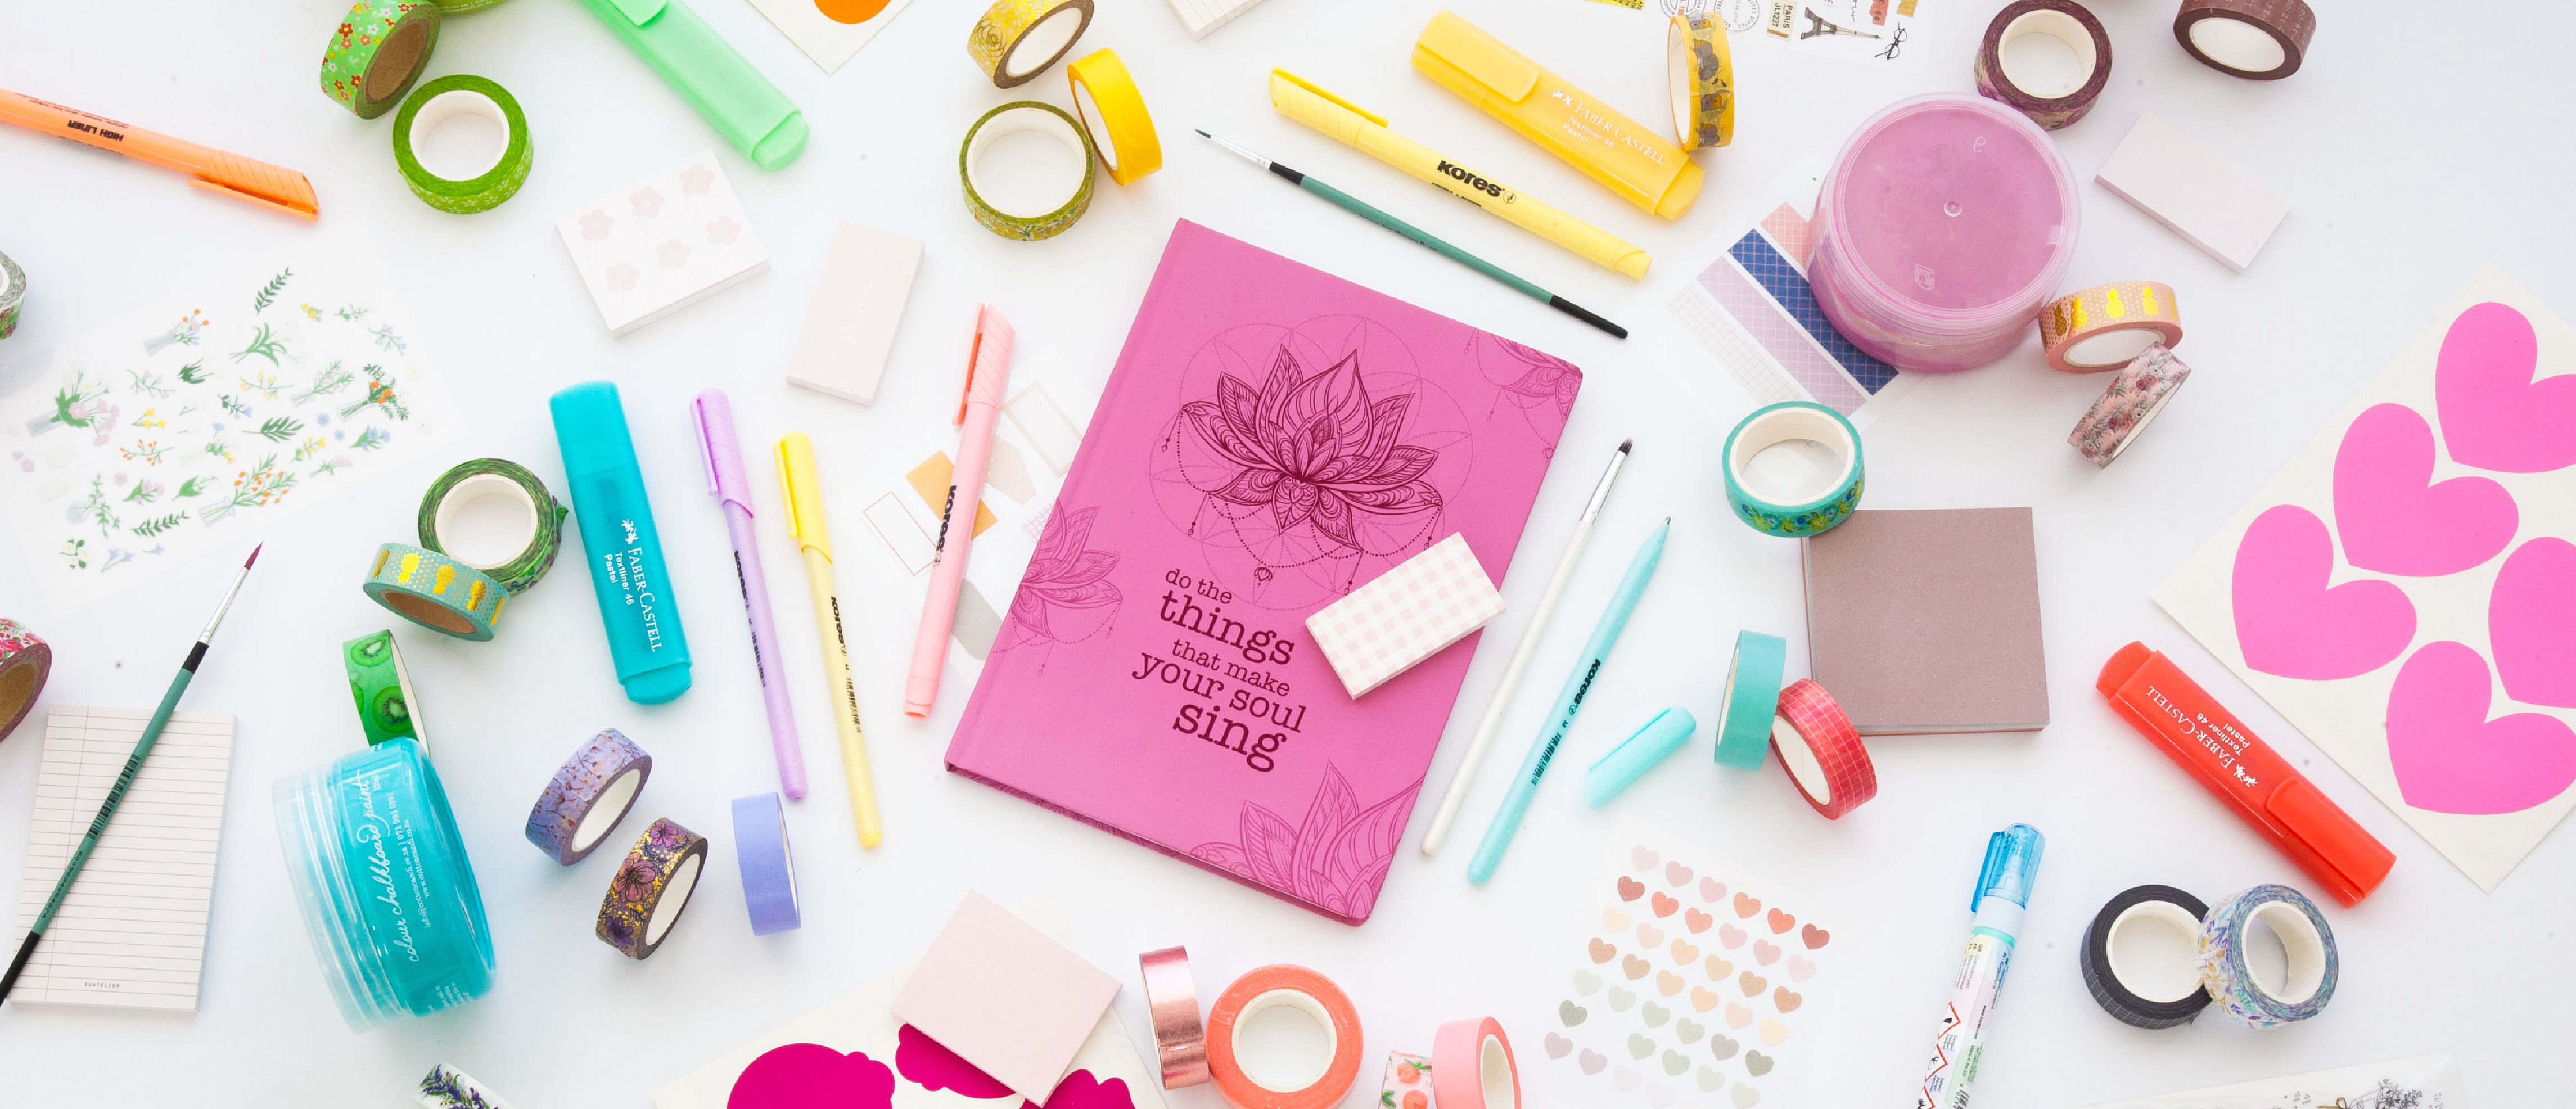 Image shows a pink journal with various stationery on a desk